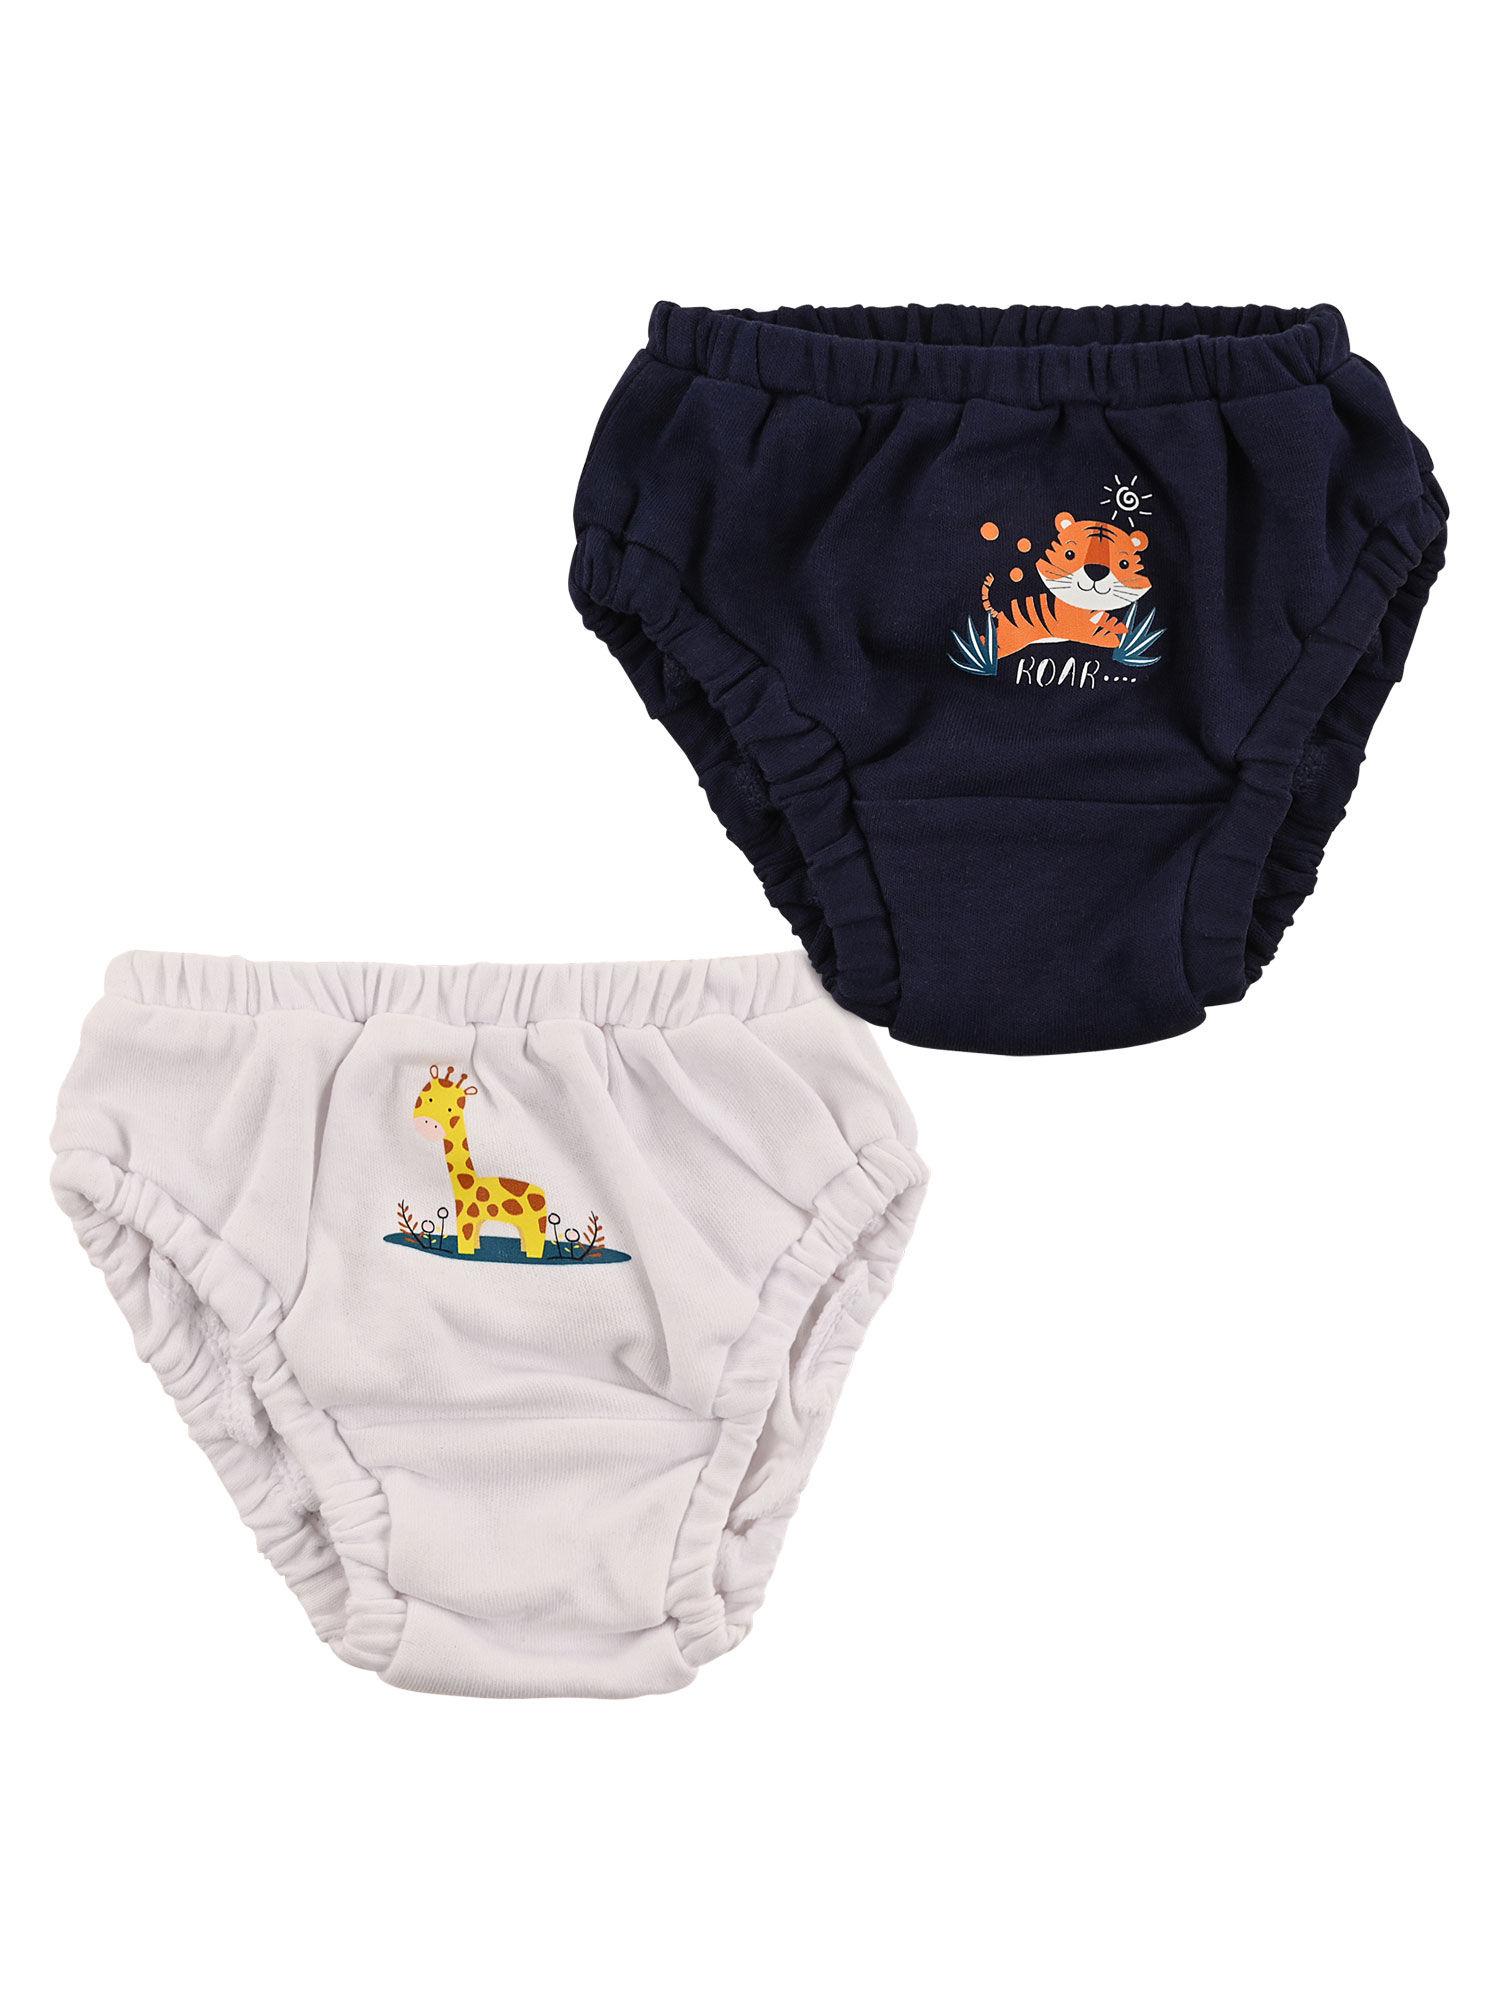 baby boys printed bloomer brief underwear white and black (pack of 2)